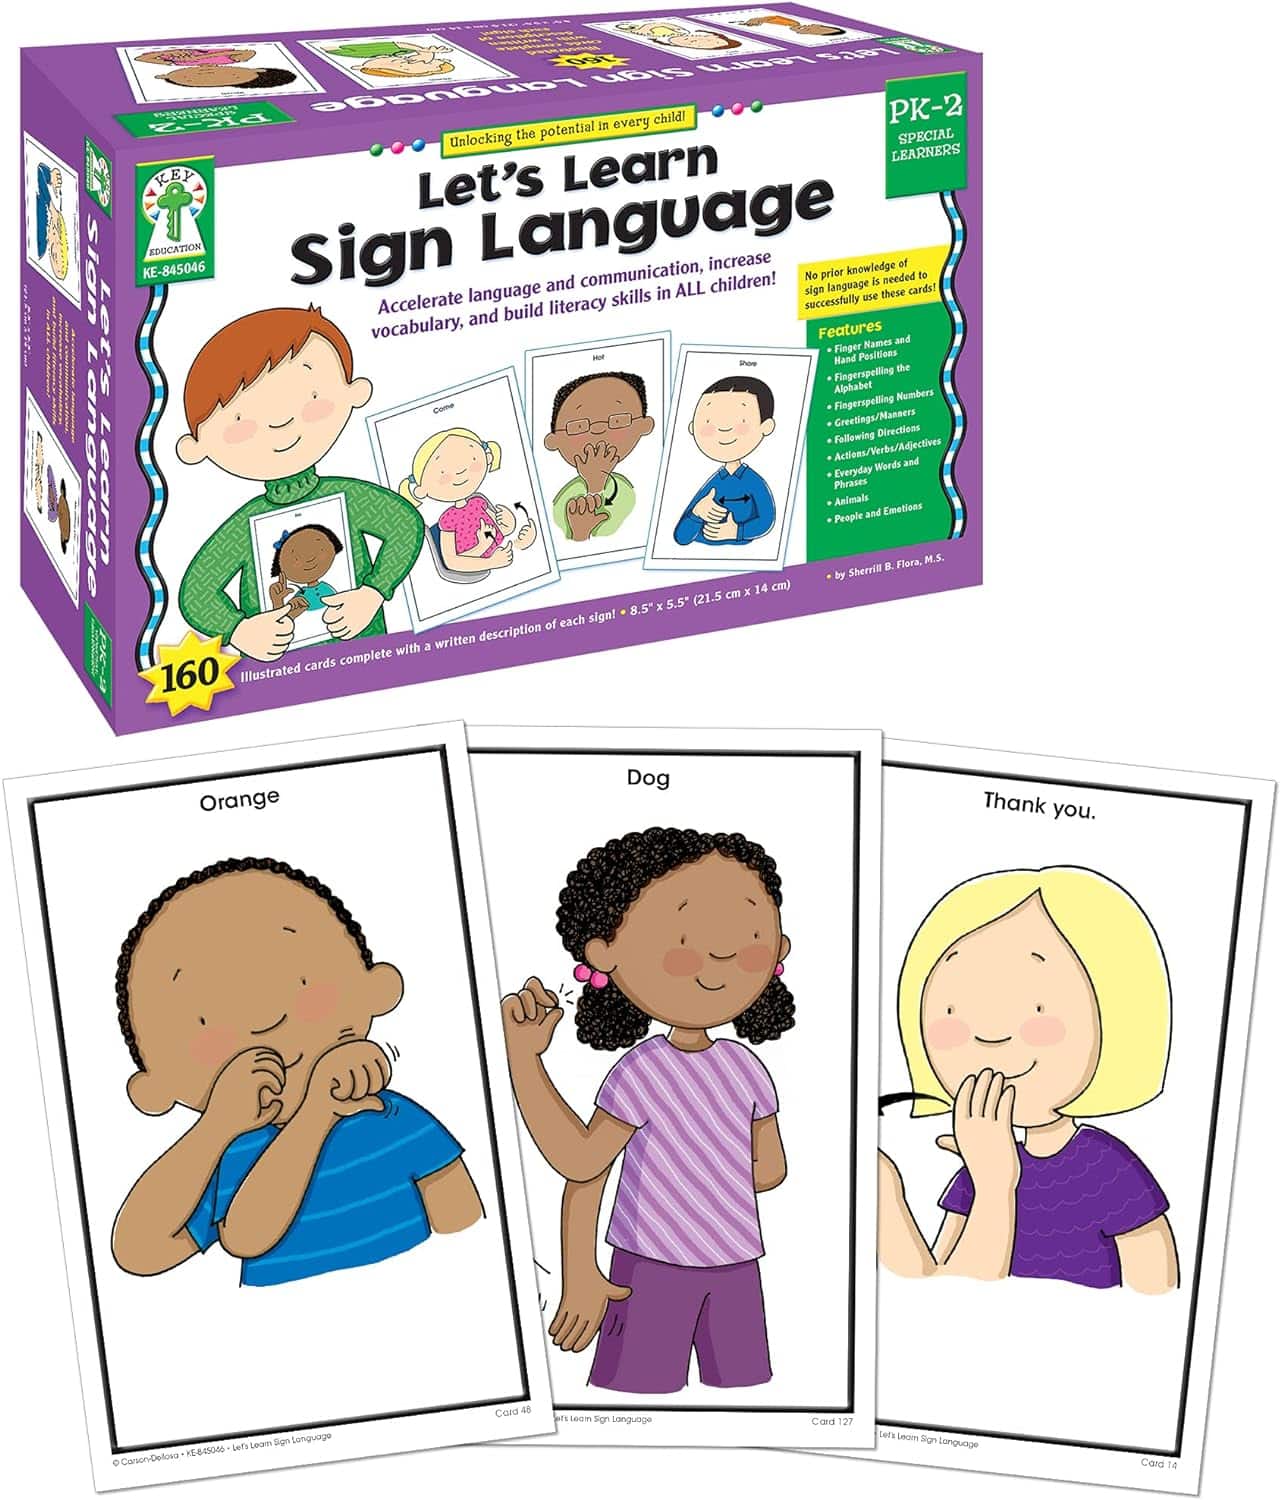 Key Education 160 American Sign Language Flash Cards for Kids, ASL Flash Cards for Kids PreK–Grade 2, ASL Cards for Beginners Covering 160 Sight Words, Alphabet, Numbers, Emotions, and More ASL Signs